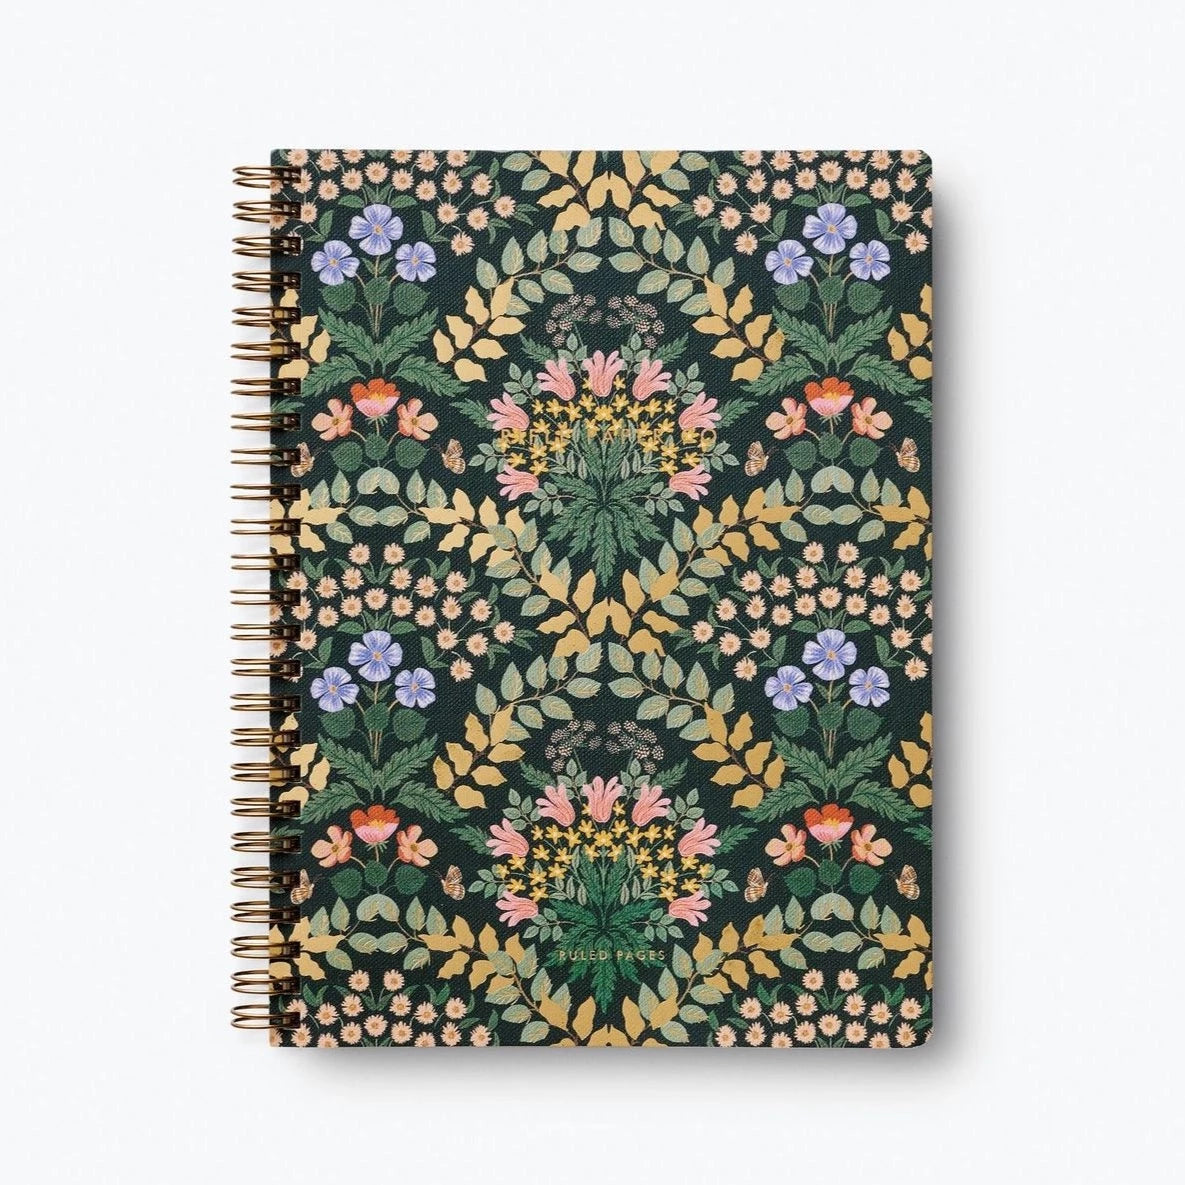 Gold spiral bound notebook. Notebook cover is floral with lots of vines and greenery. Flowers printed on the cover are pink and blue